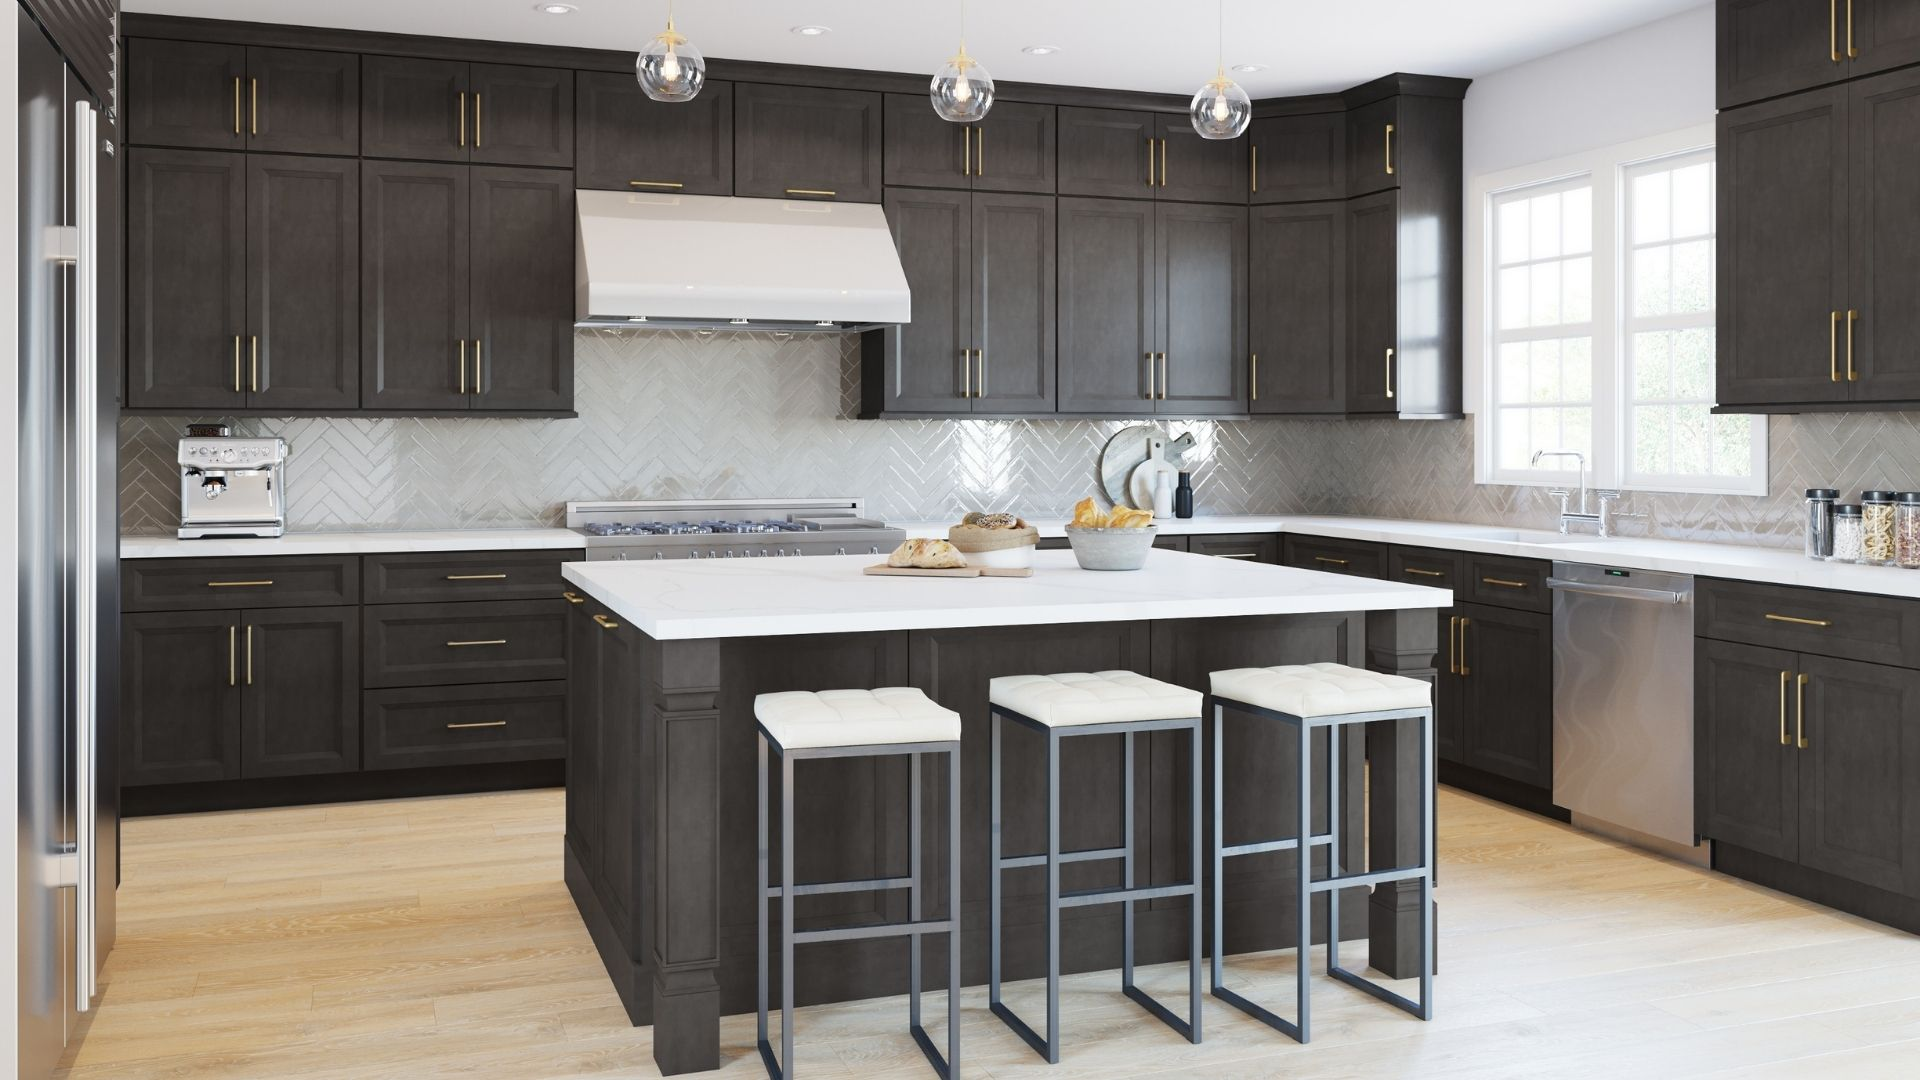 A kitchen with Fabuwood Allure Series cabinets